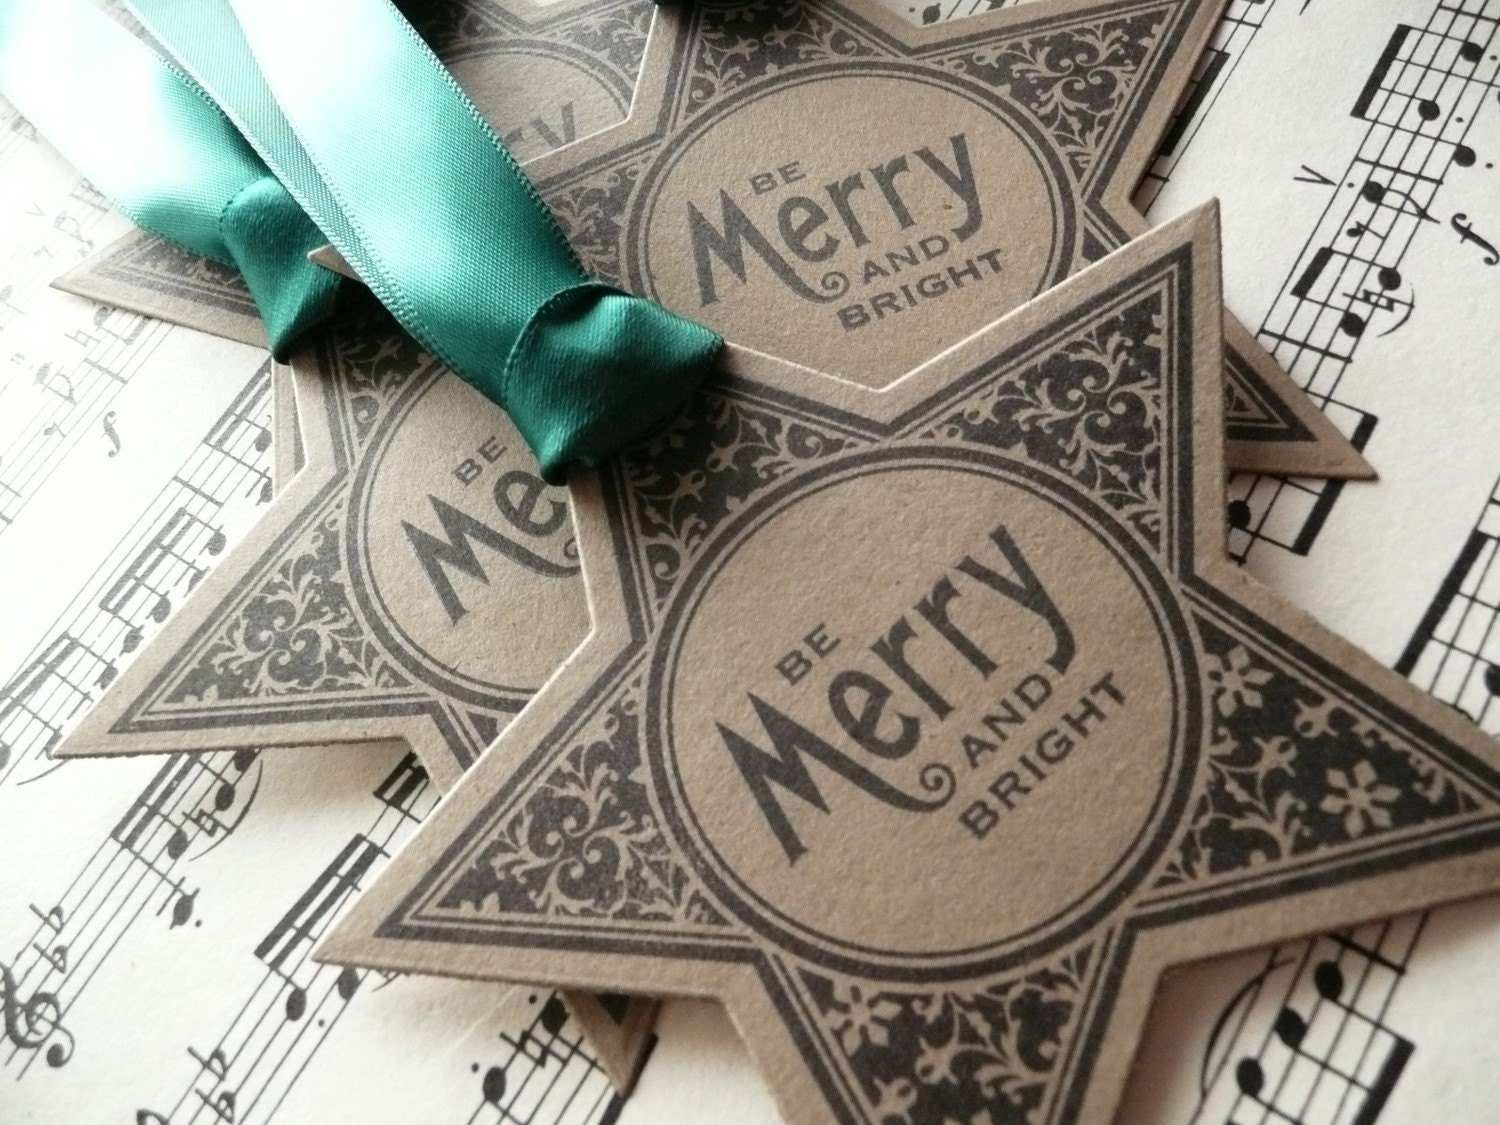 Be Merry and Bright - Christmas Gift Tags - A Set of 4